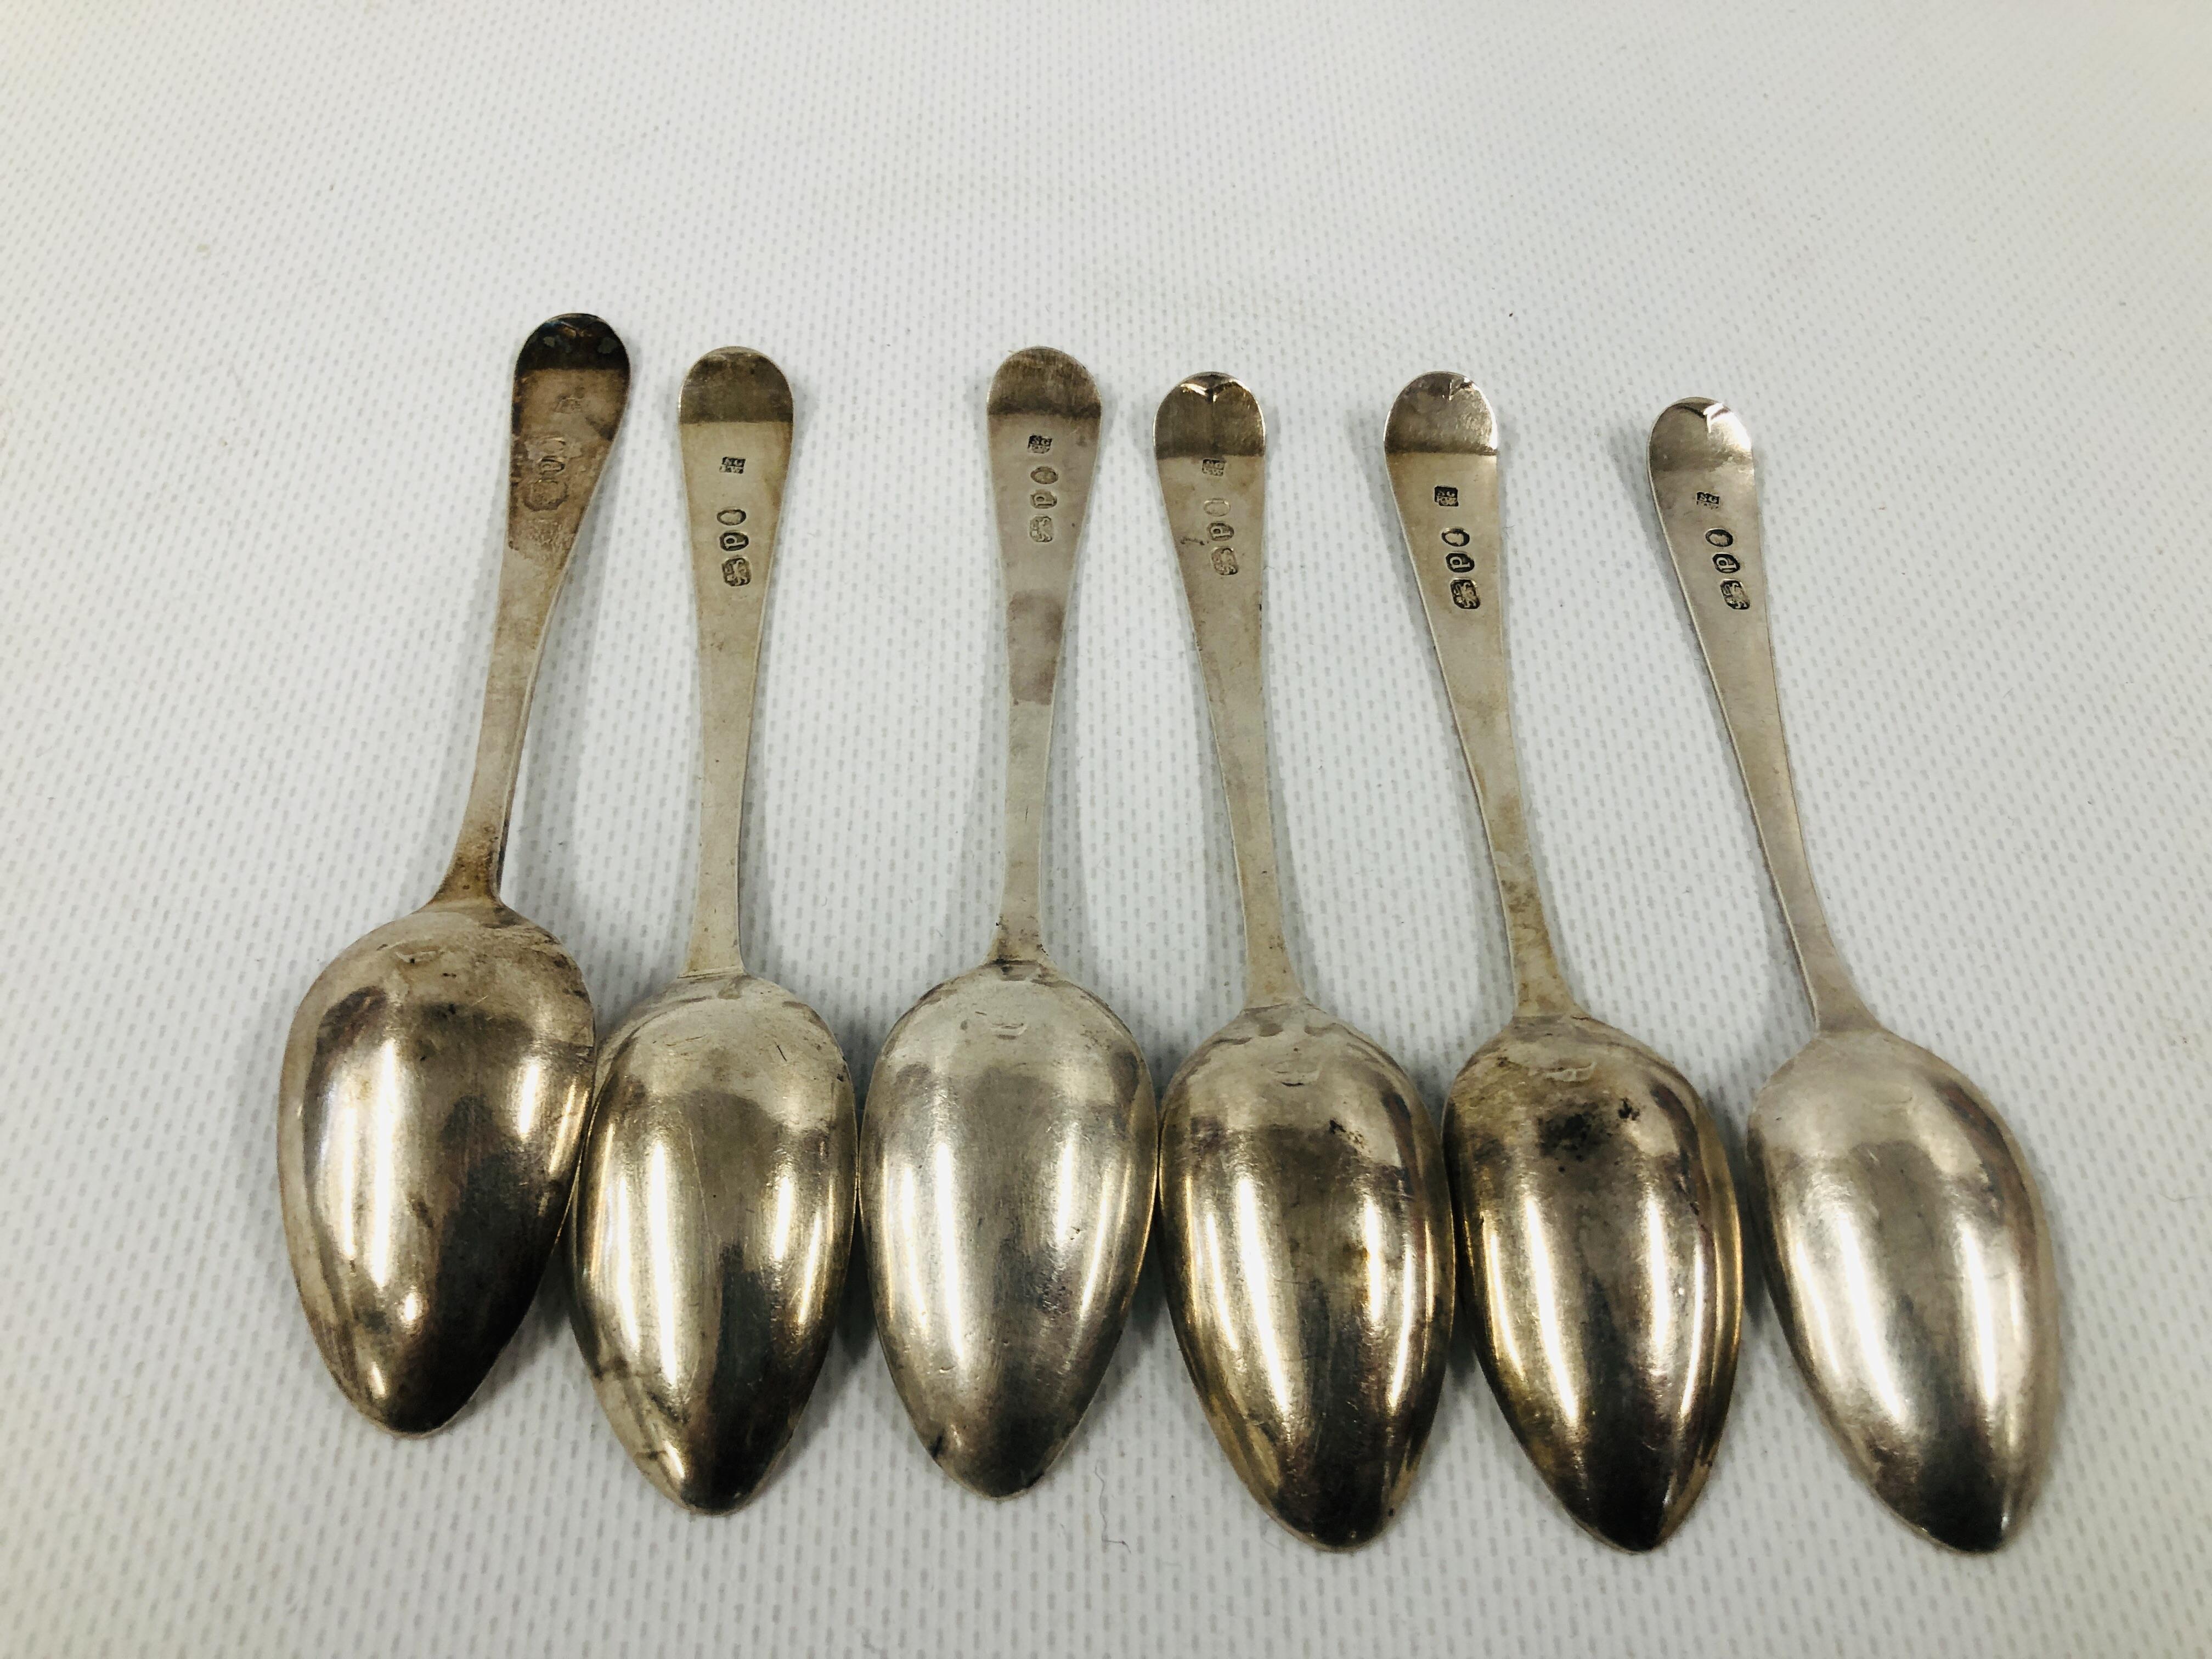 SET OF SIX SILVER GEORGE IV BRIGHT CUT TEA SPOONS, PROBABLY LONDON 1810. - Image 5 of 8